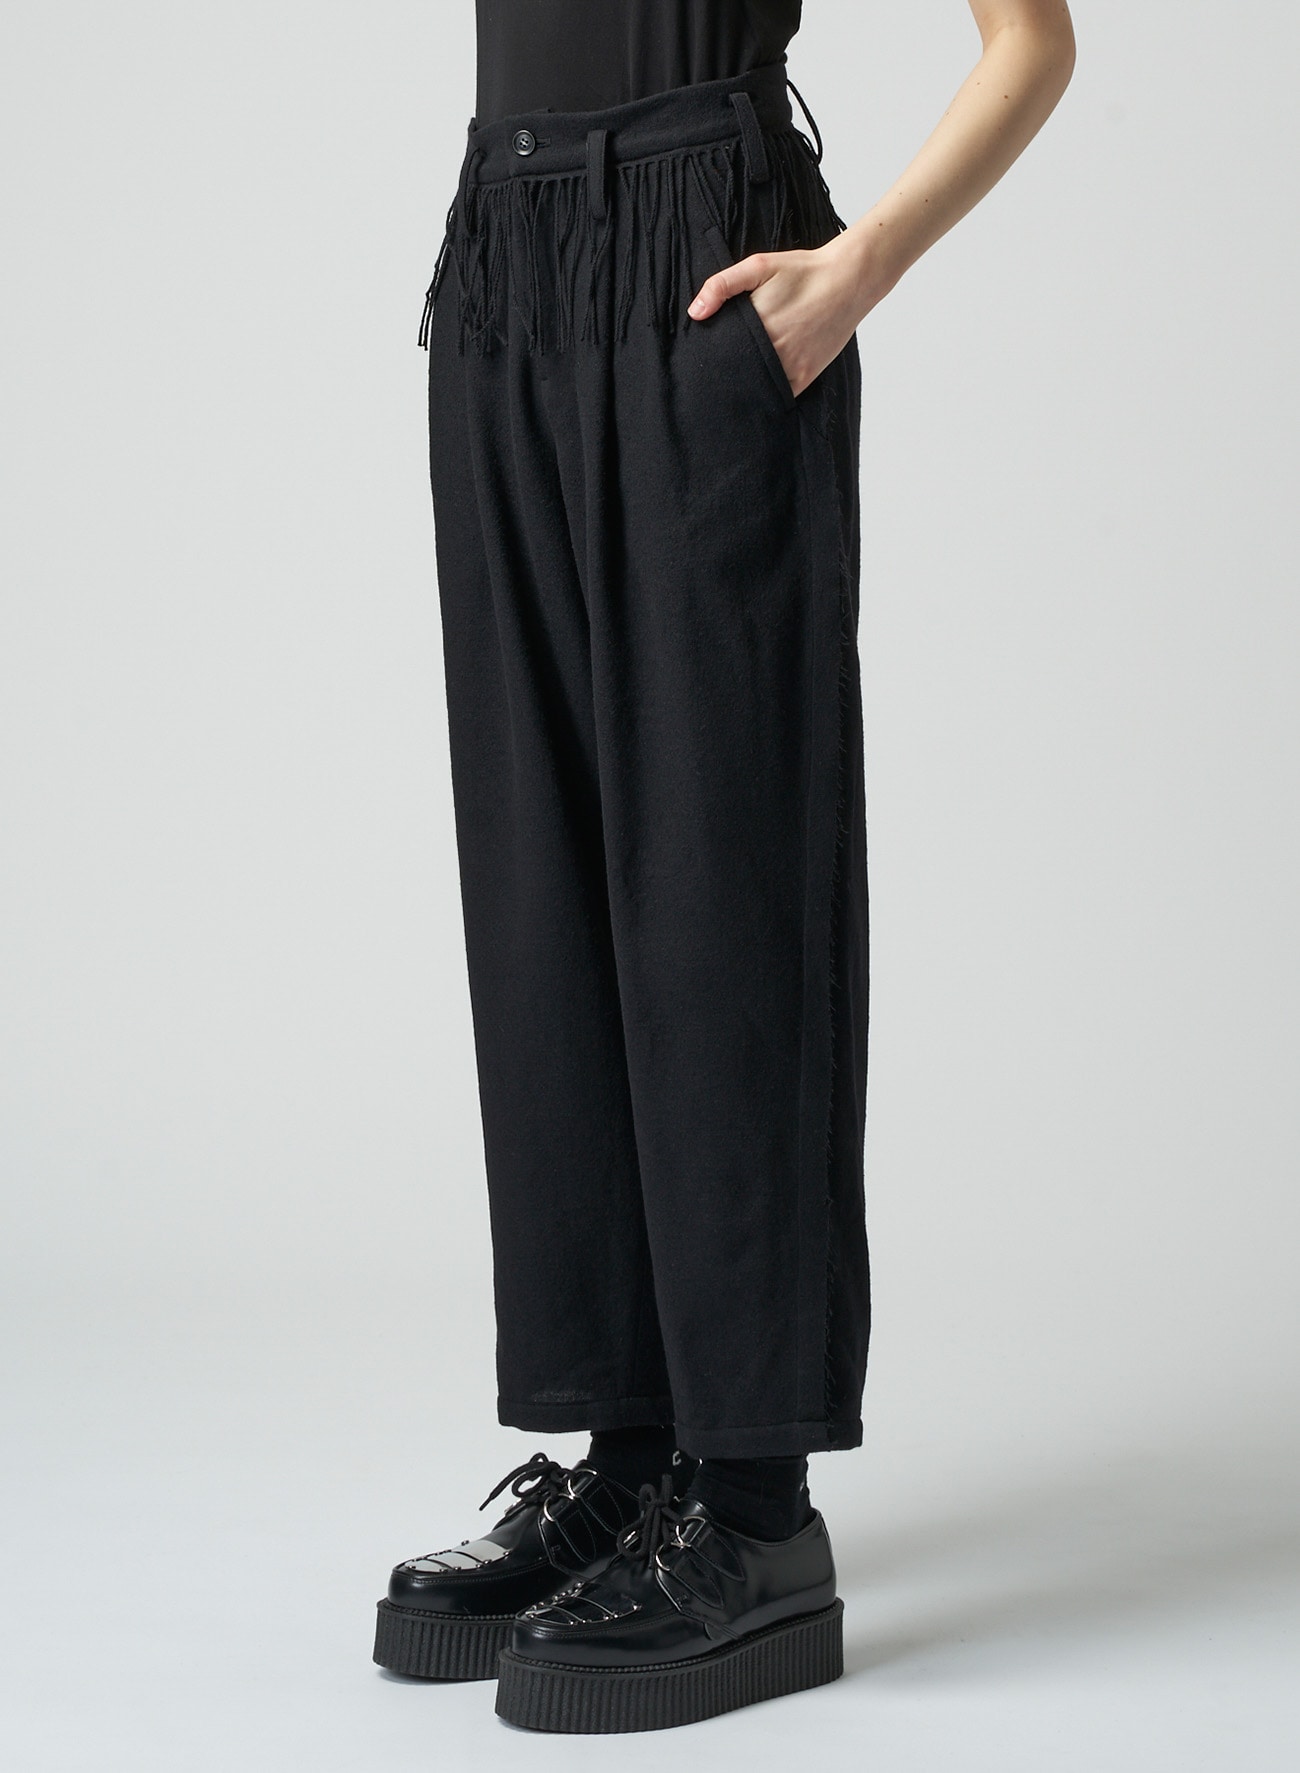 Black Technical-pleated trousers